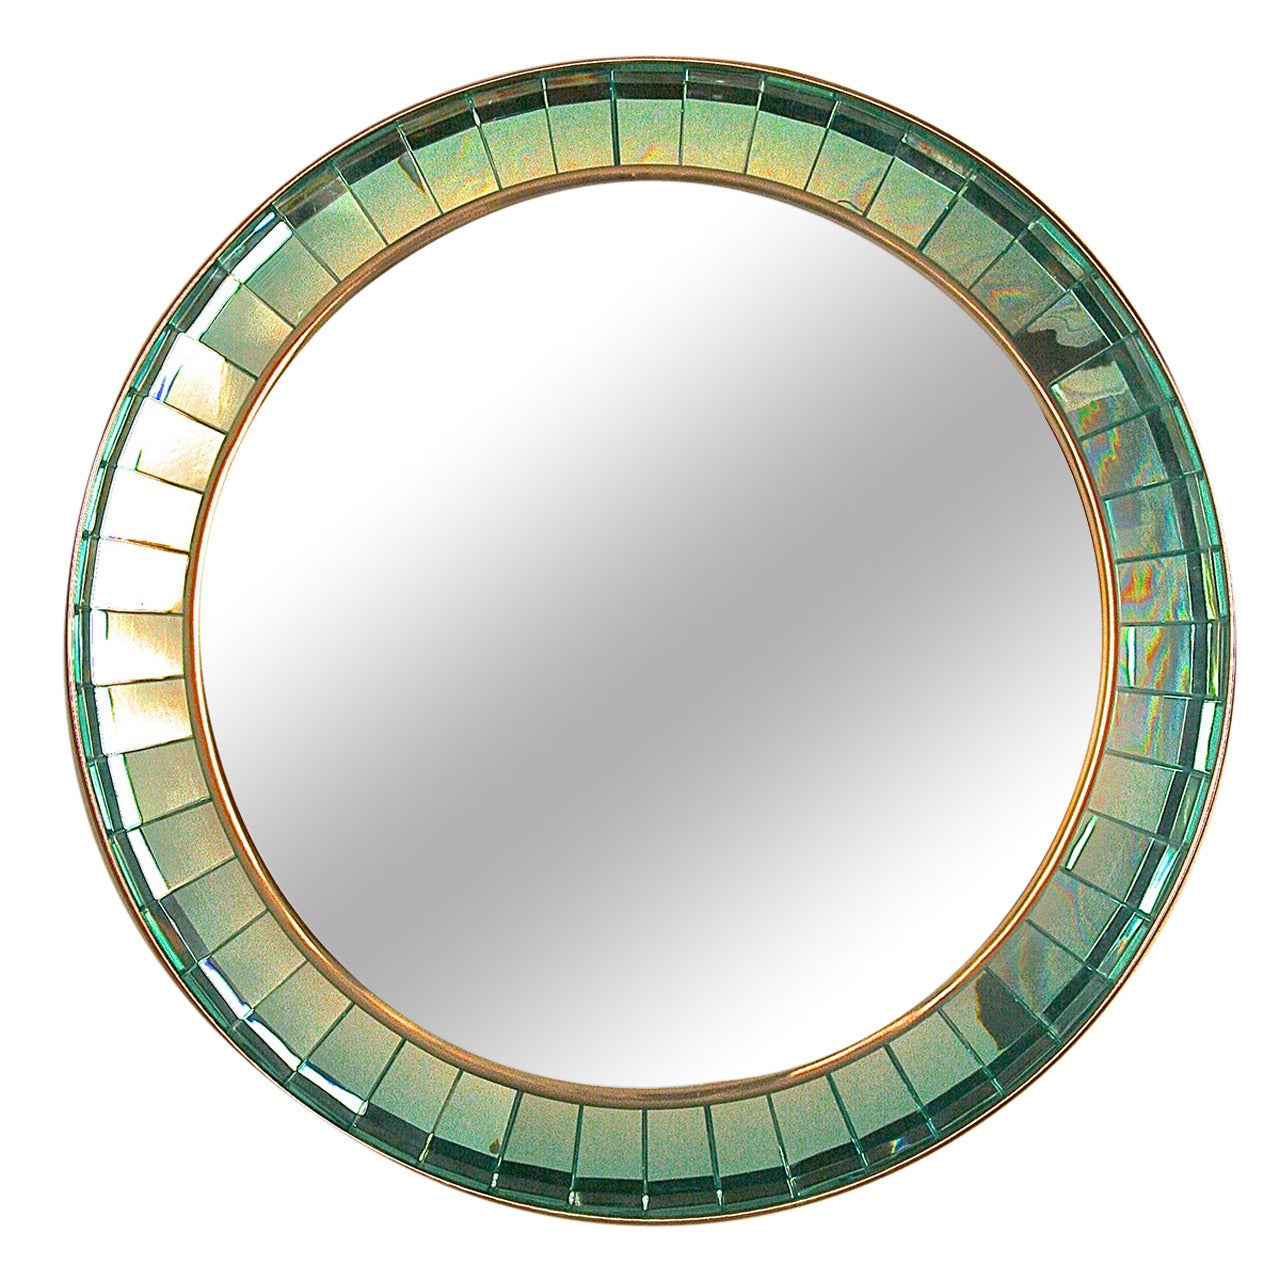 Limited Edition Hand-Cut Crystal Glass Mirror by Ghiro Studios, Italy